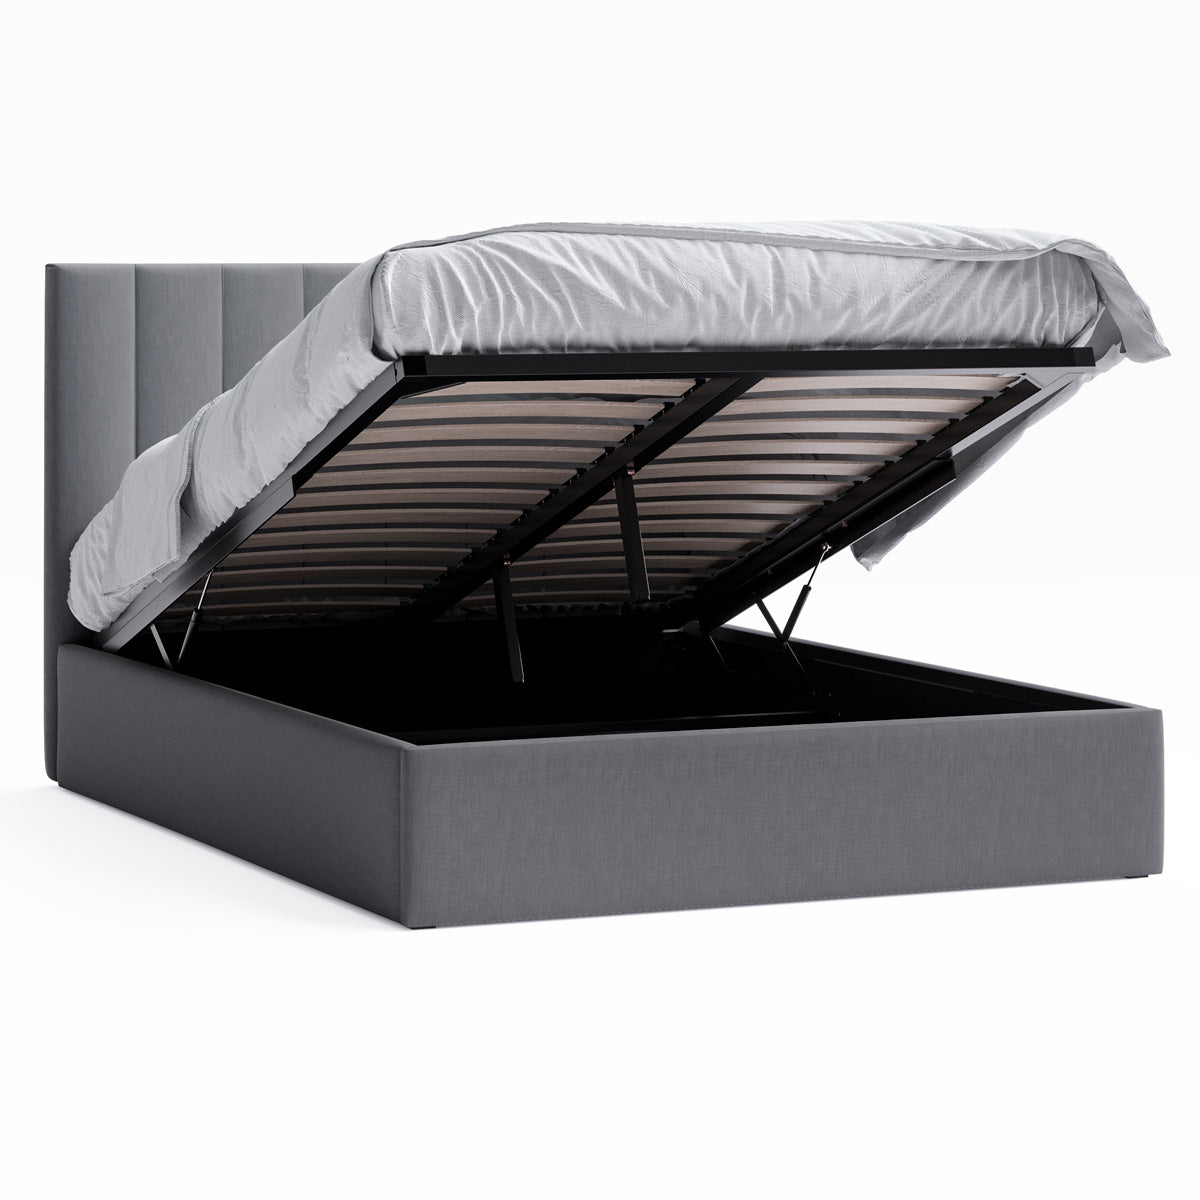 Ormond Gas Lift Storage Bed Frame (Charcoal Fabric)